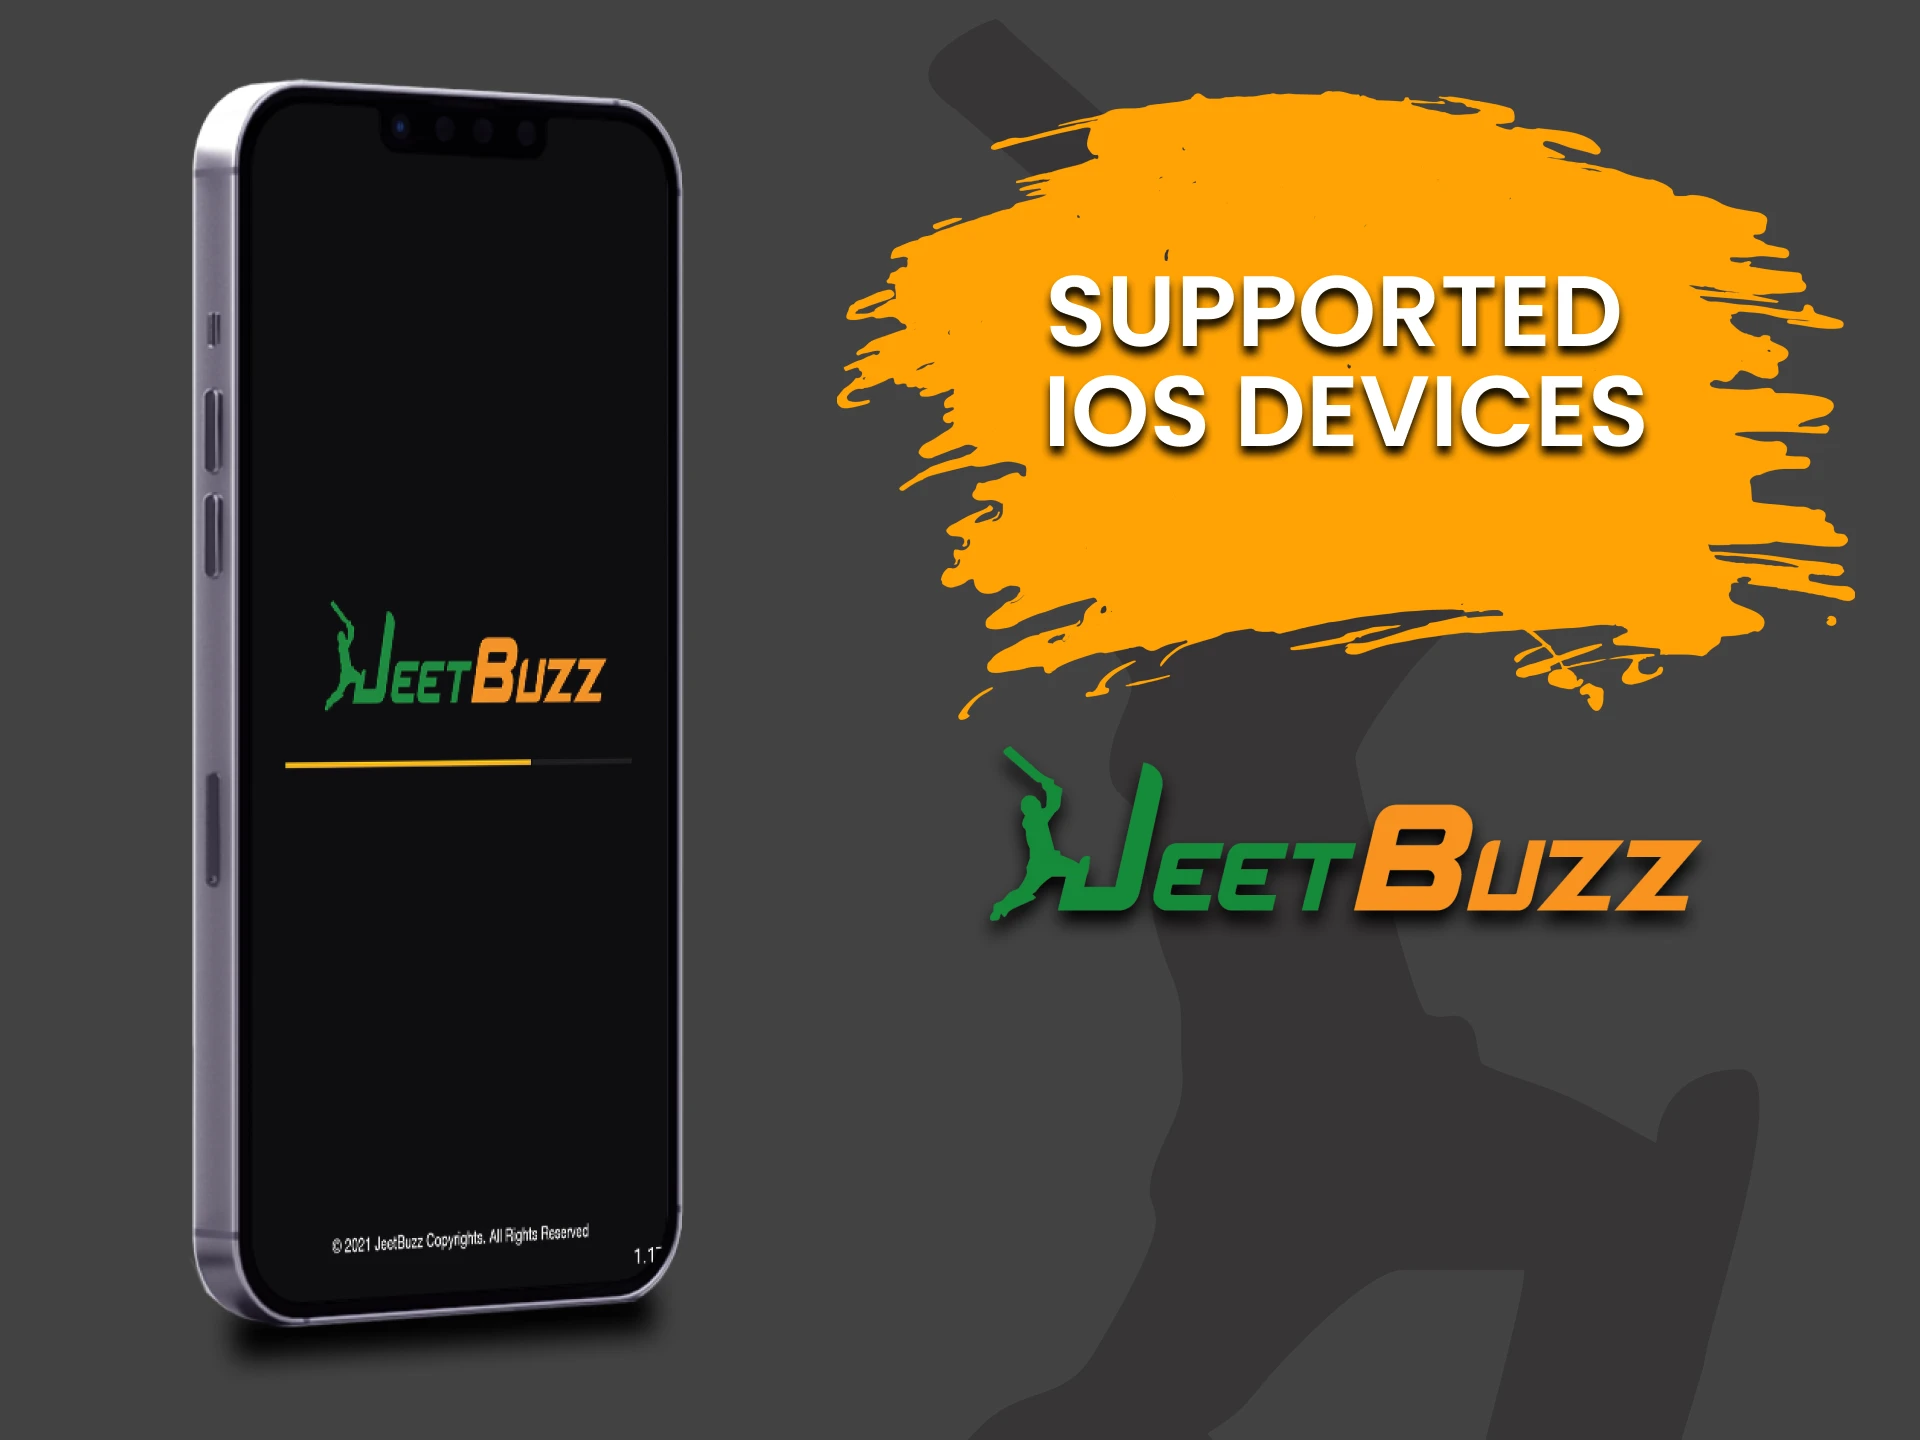 Install the JeetBuzz app for iOS.